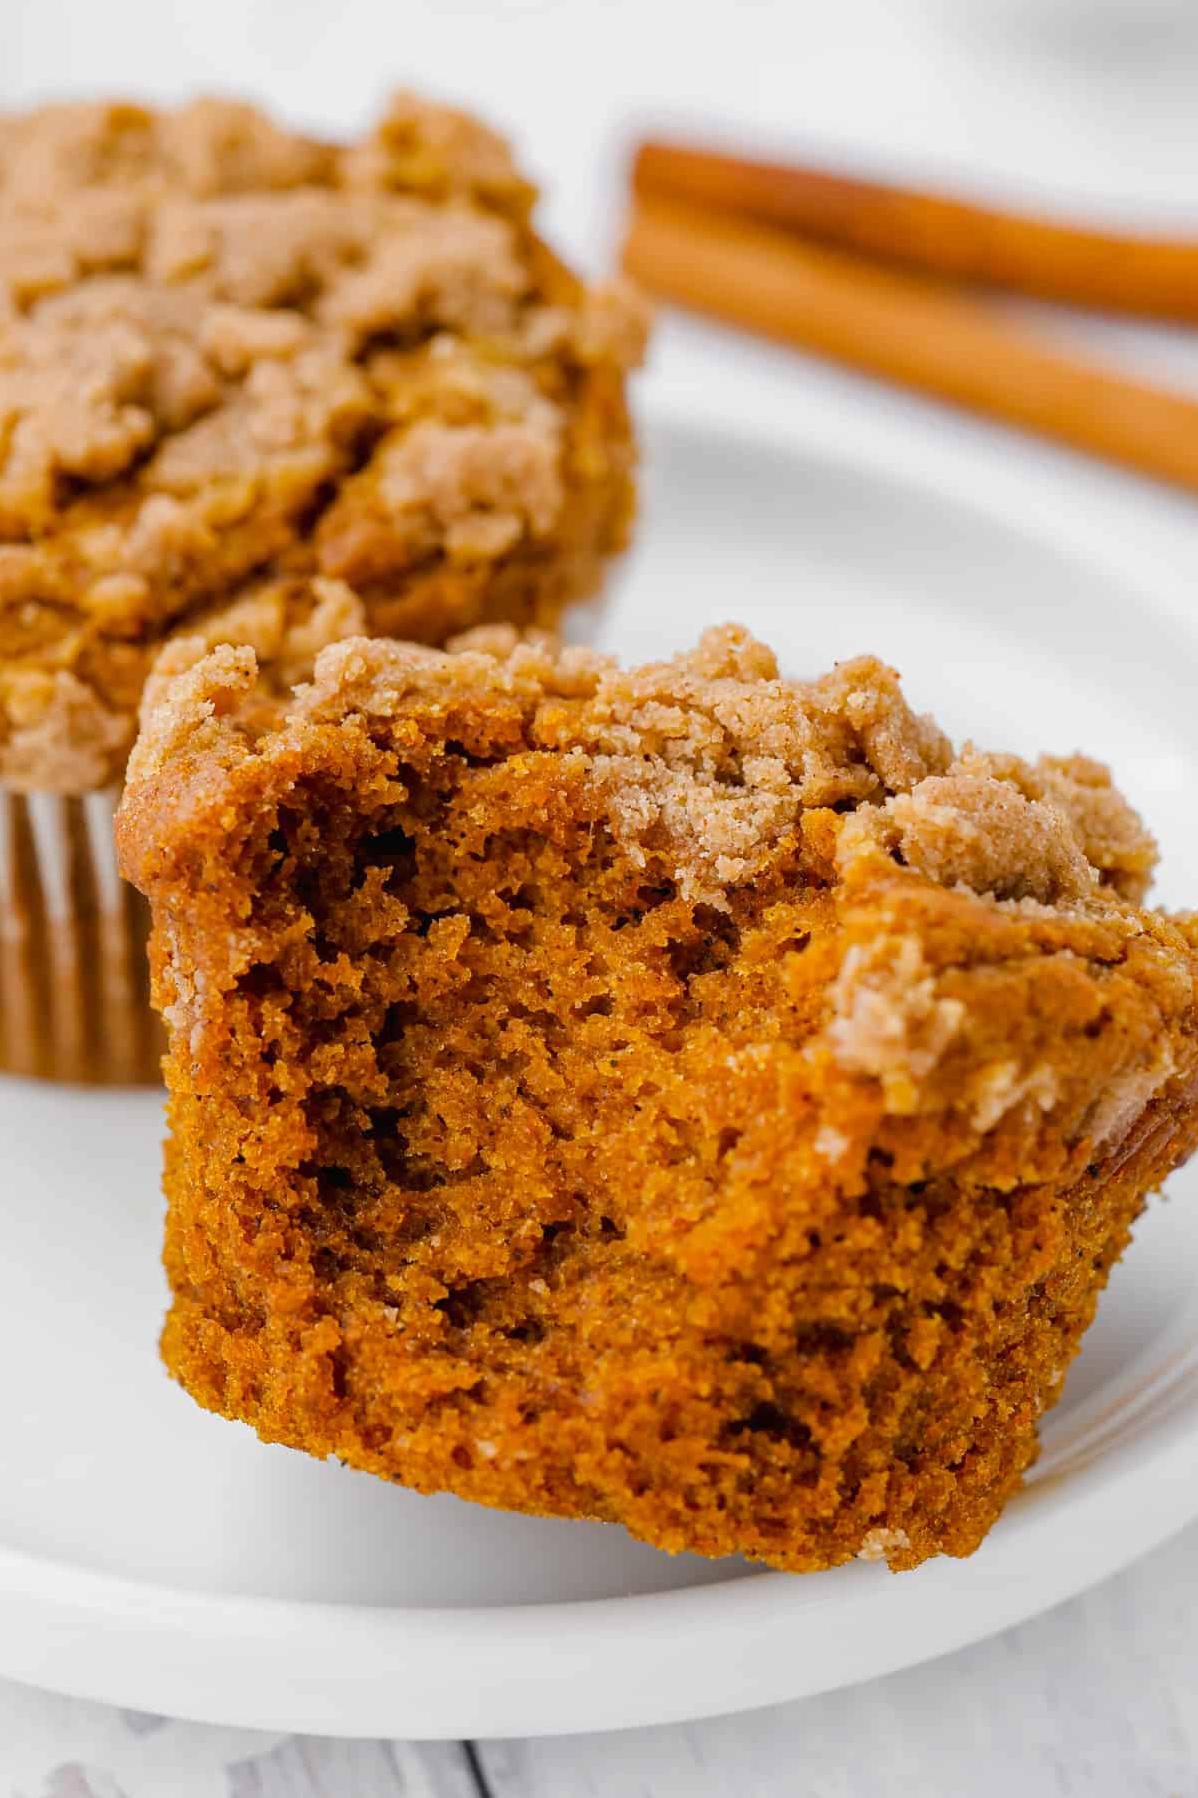  The combination of pumpkin and coconut is a match made in muffin heaven.